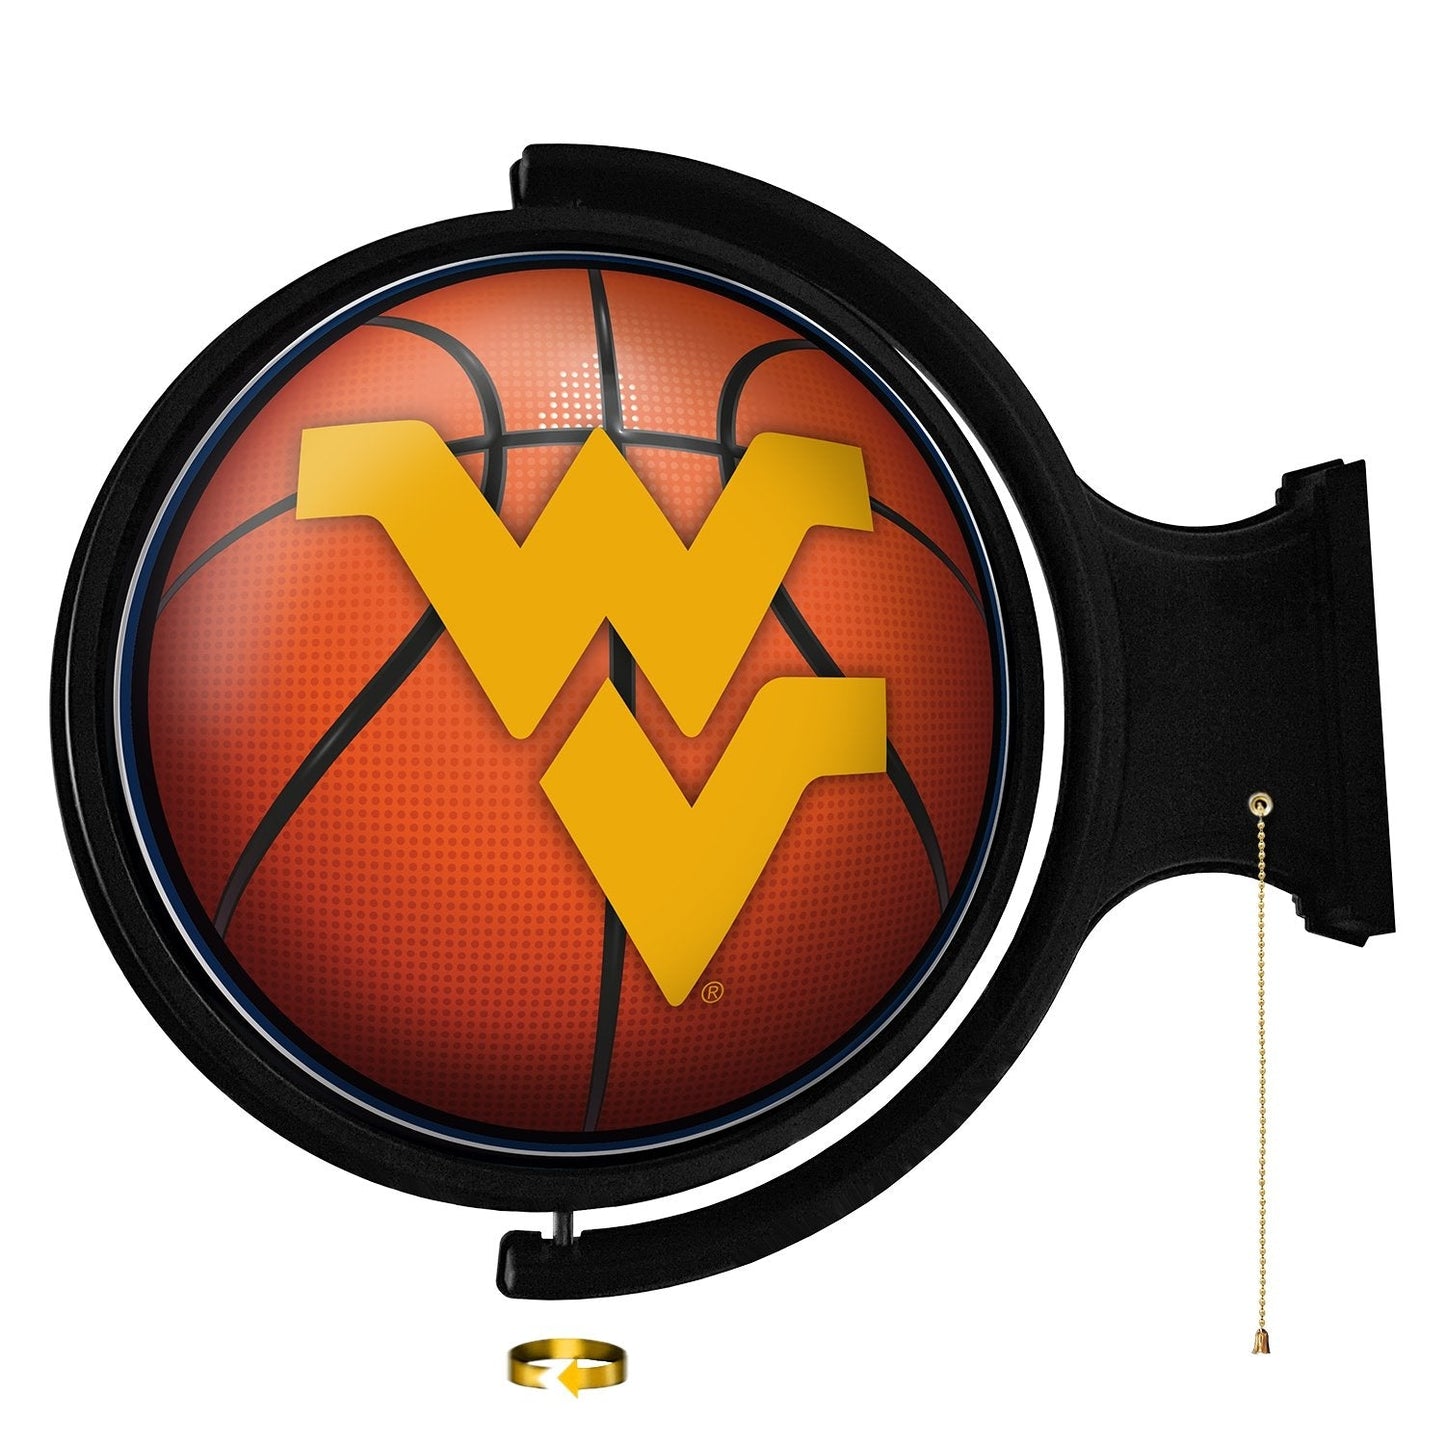 West Virginia Mountaineers: Basketball - Original Round Rotating Lighted Wall Sign - The Fan-Brand